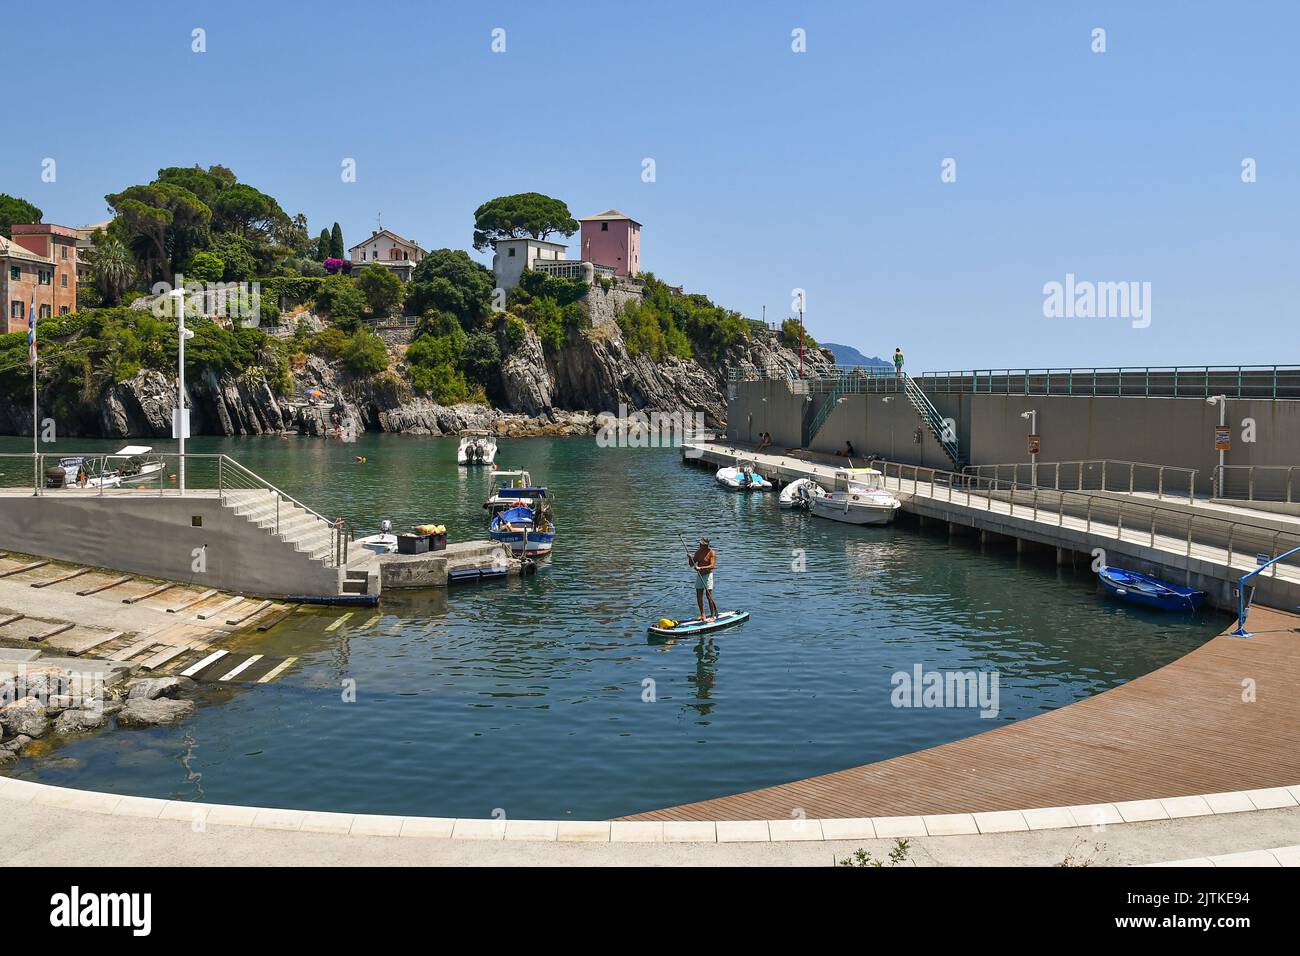 View of the small port of the old fishing village with a man sup paddling in summer, Nervi, Genoa, Liguria, Italy Stock Photo